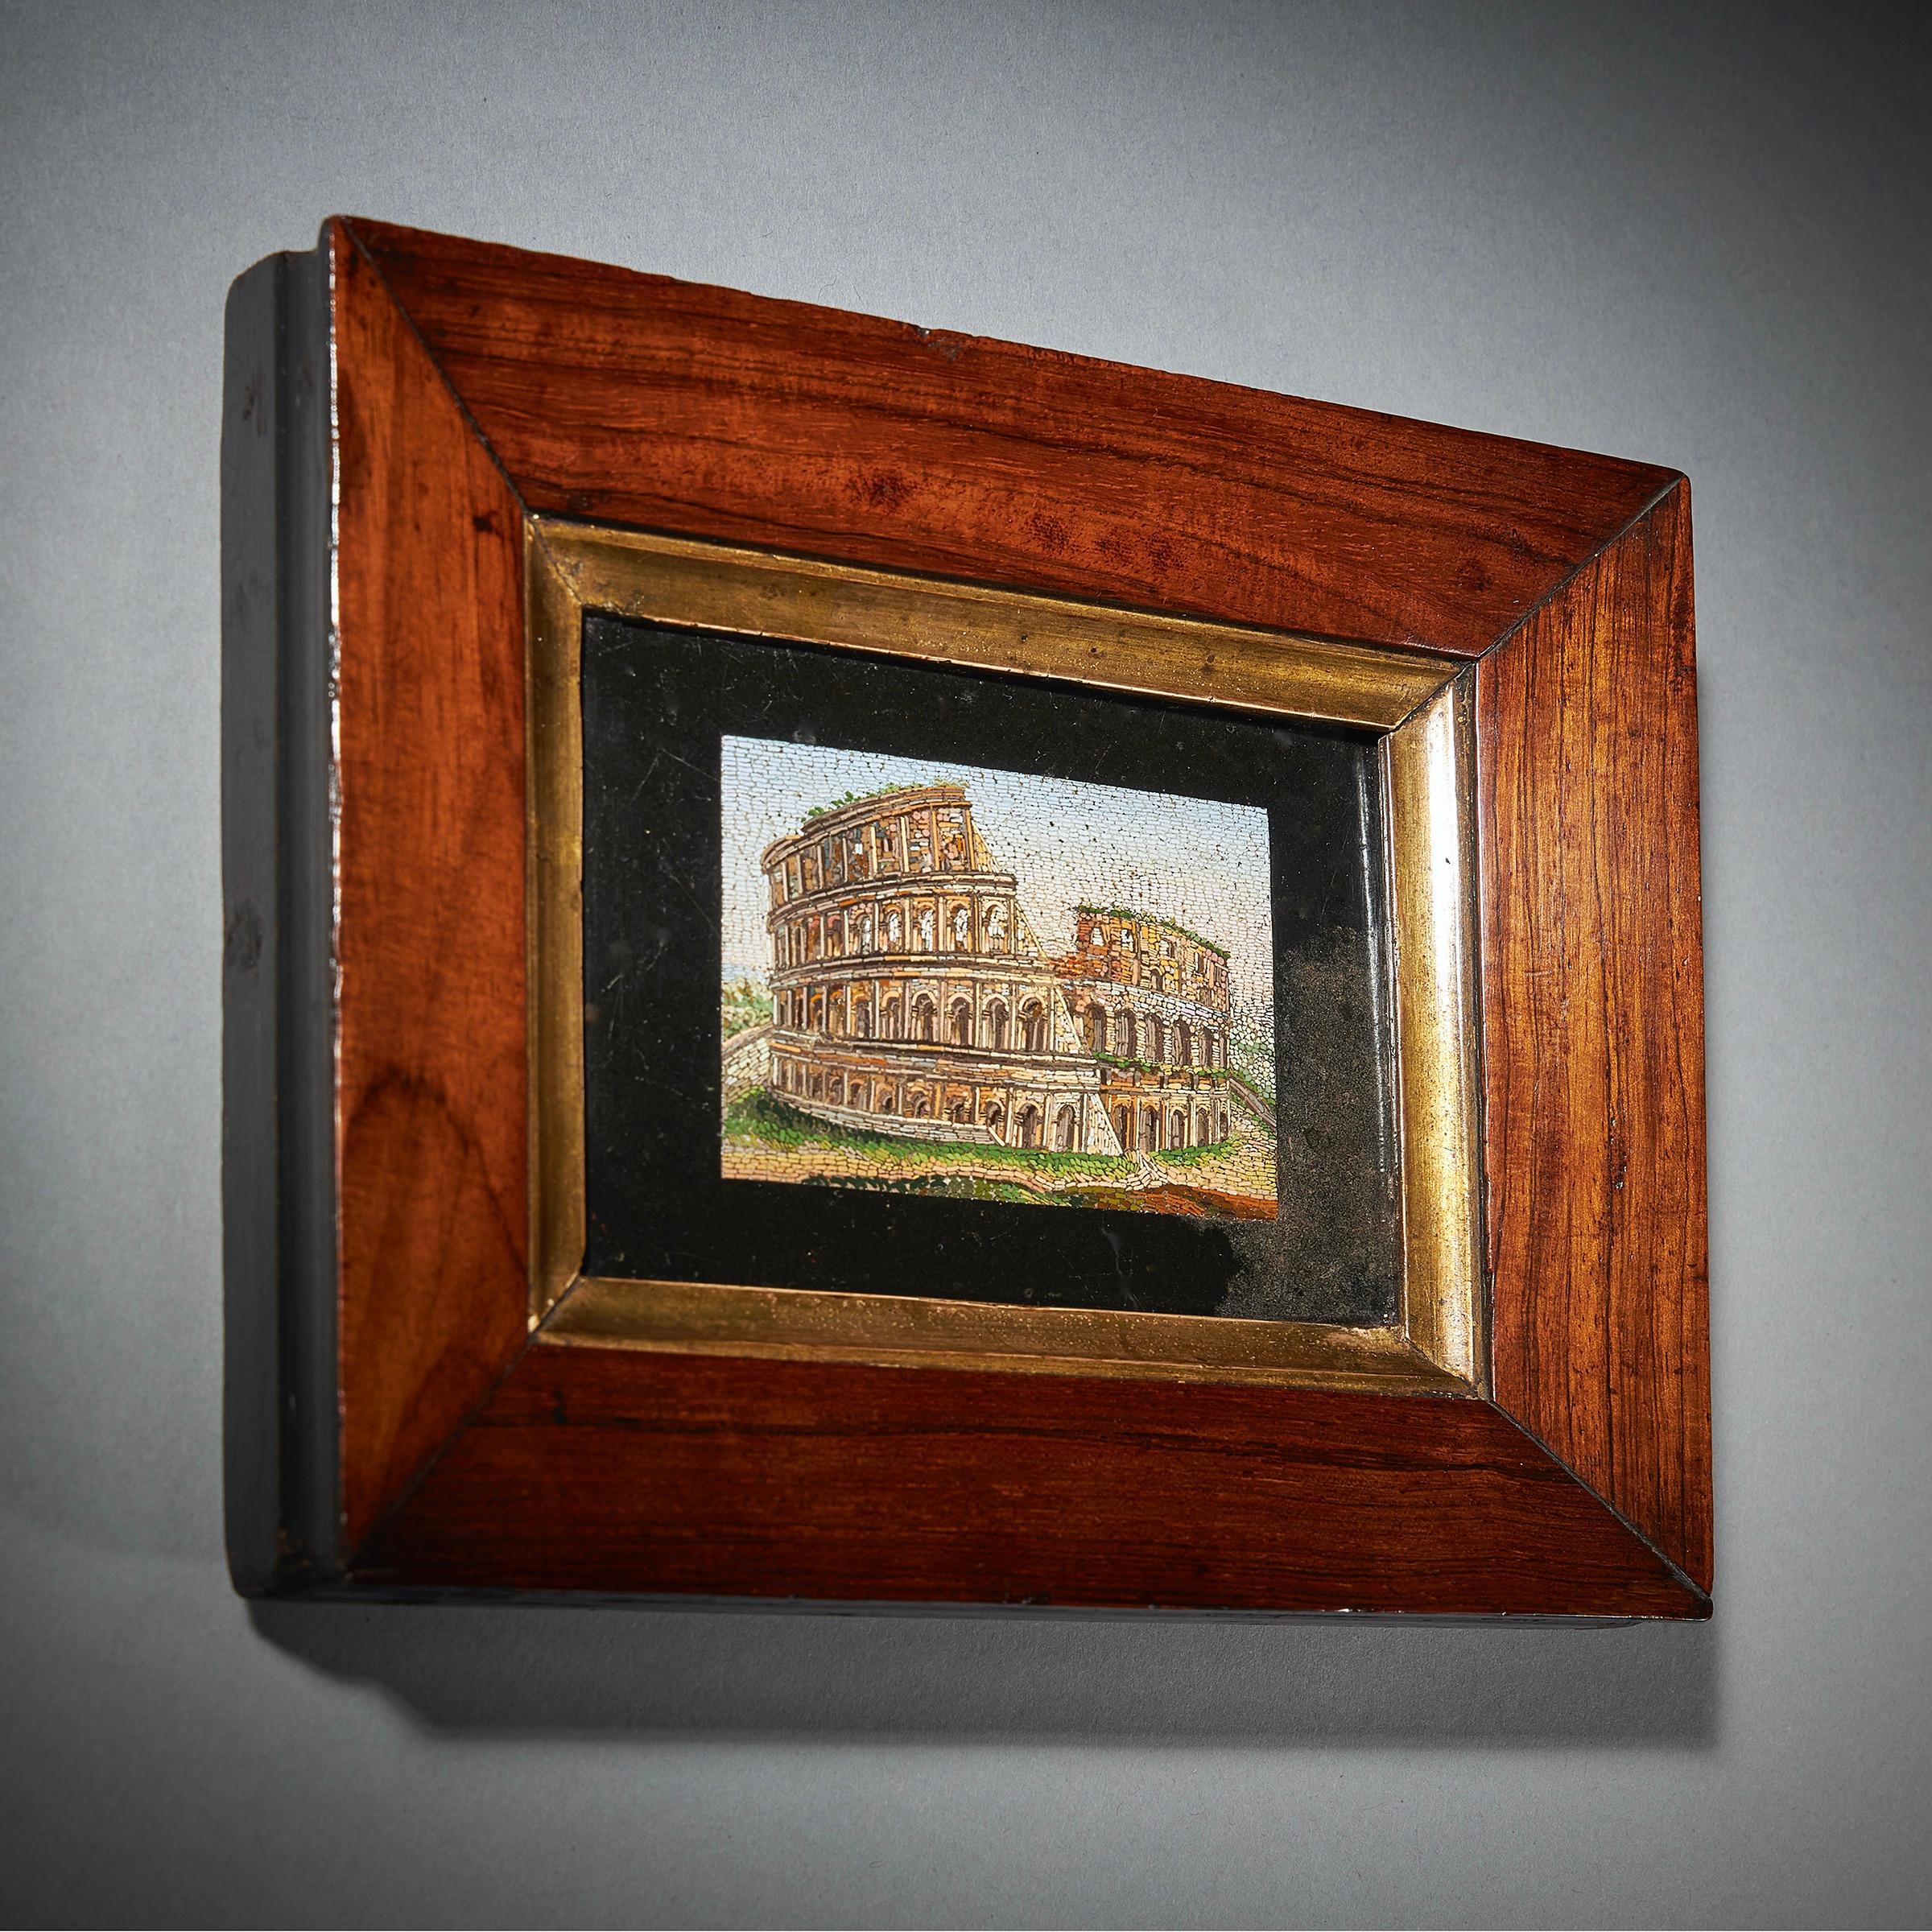 A fine and rare early 19th century framed grand tour pulvinated micro mosaic of the iconic Colosseum of Rome, Italy, in a period frame.

This is a most unusual micro mosaic as it is pulvinated, giving a three-dimensional view of the architectural